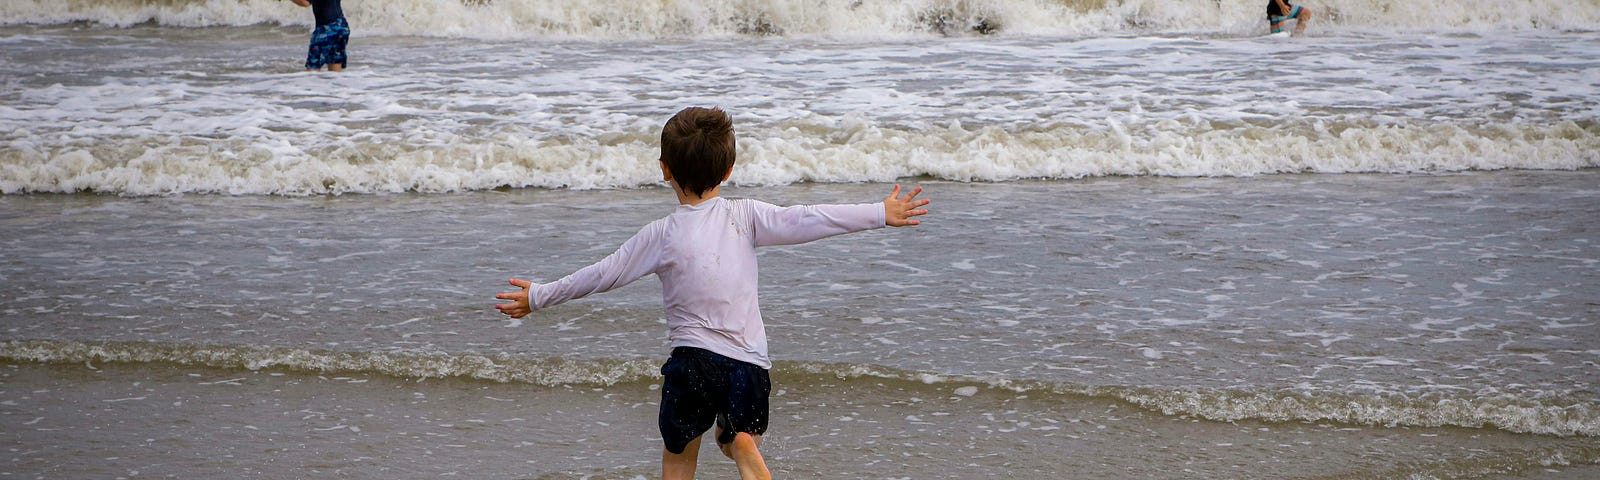 young boy in white top and black shorts running towards the sea with his arms outstretched while two more children can be seen in the waves